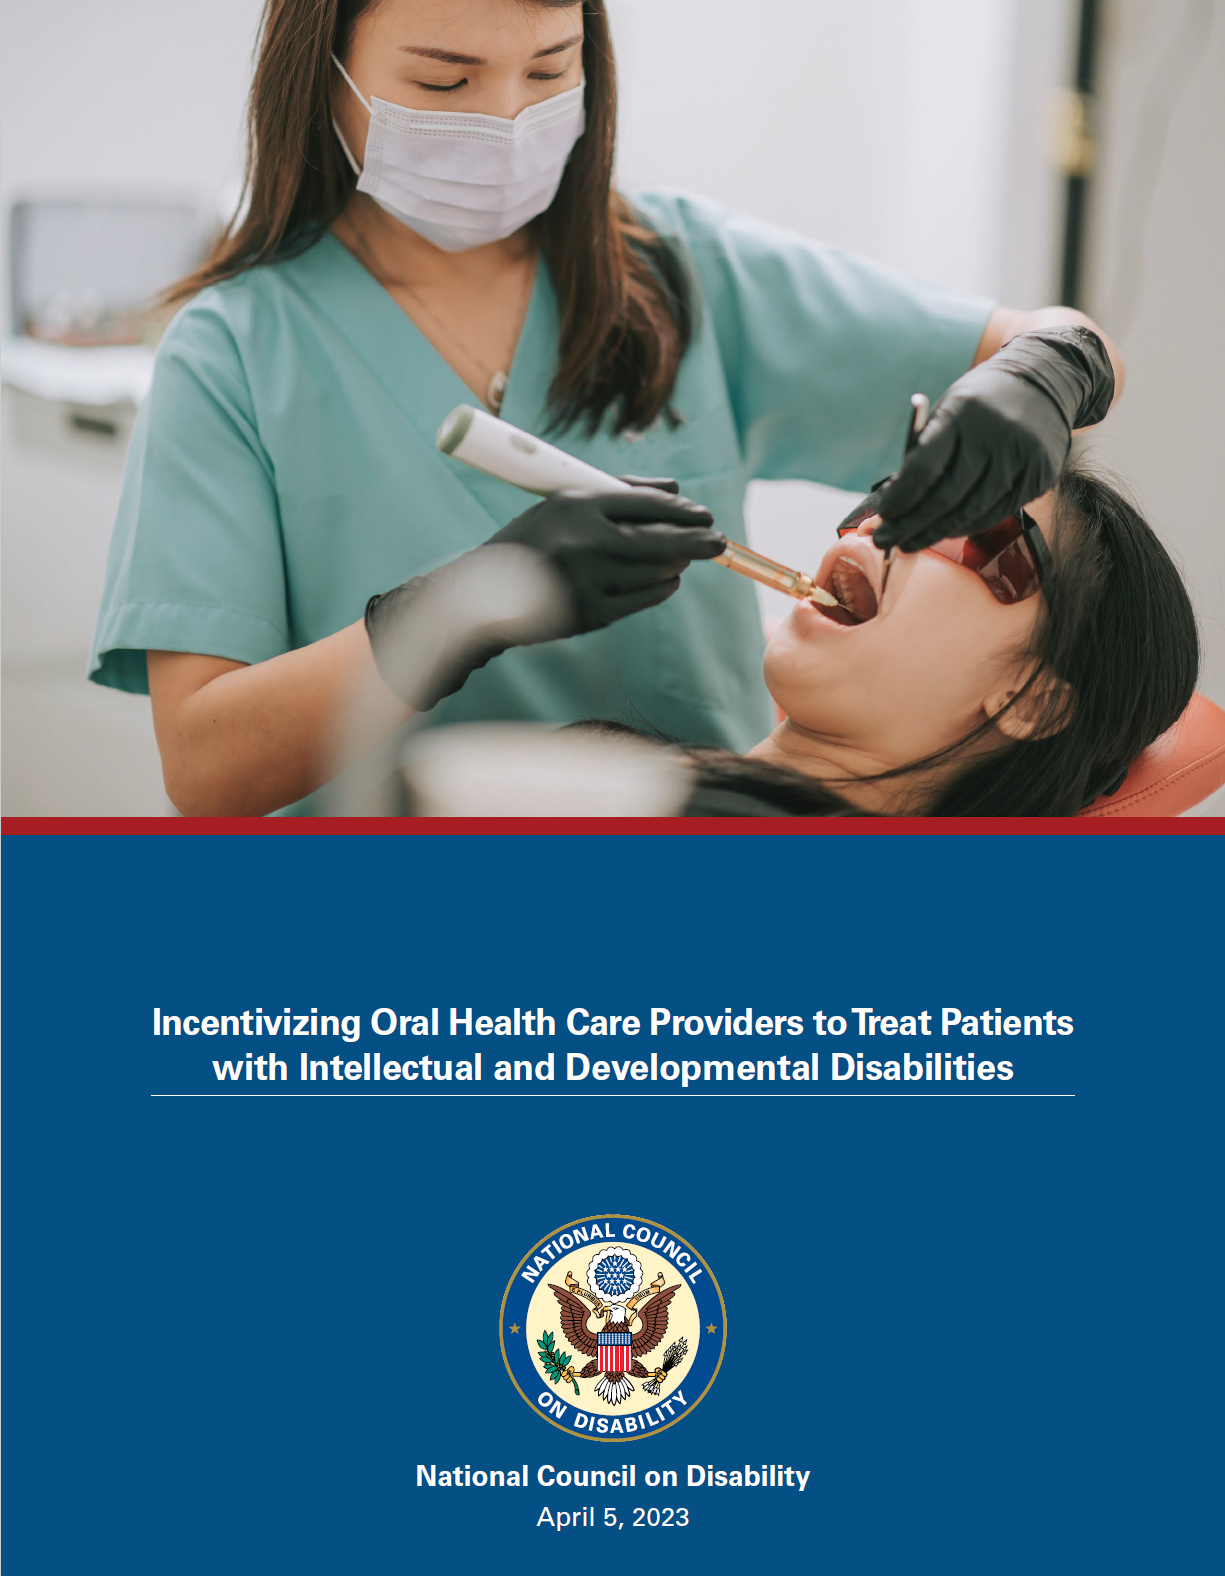 A female dentist wears a paper face mask as she works with dental tools inside the mouth of a female patient who is reclined in a dental chair and wearing dental protective glasses. Below is a blue rectangle with NCD seal and report title